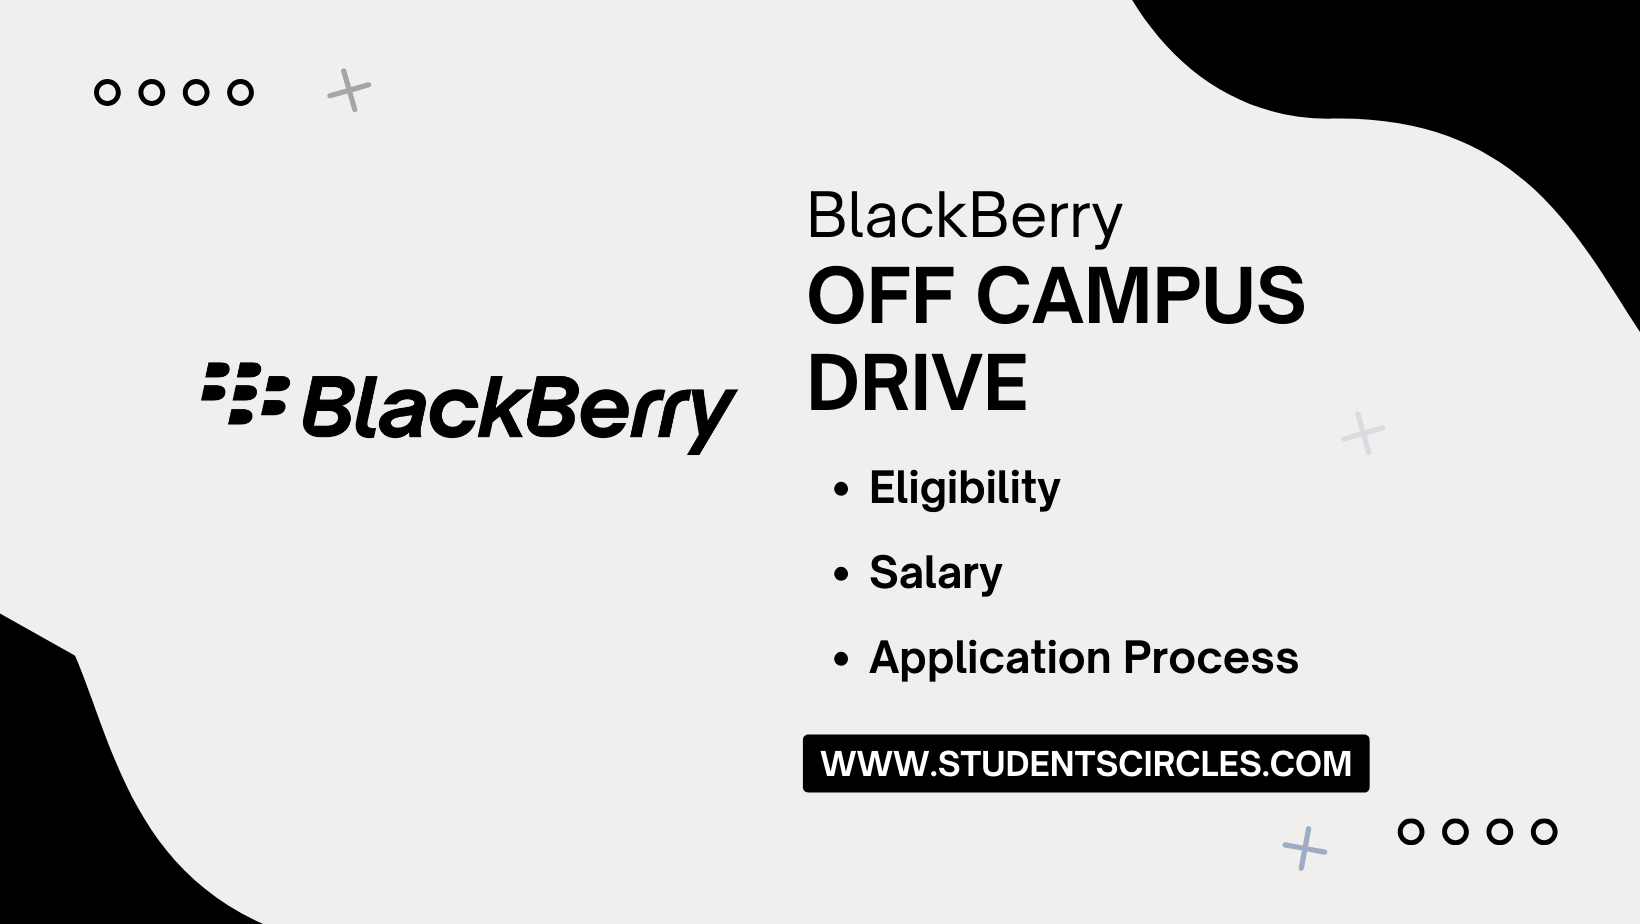 BlackBerry Off Campus Drive